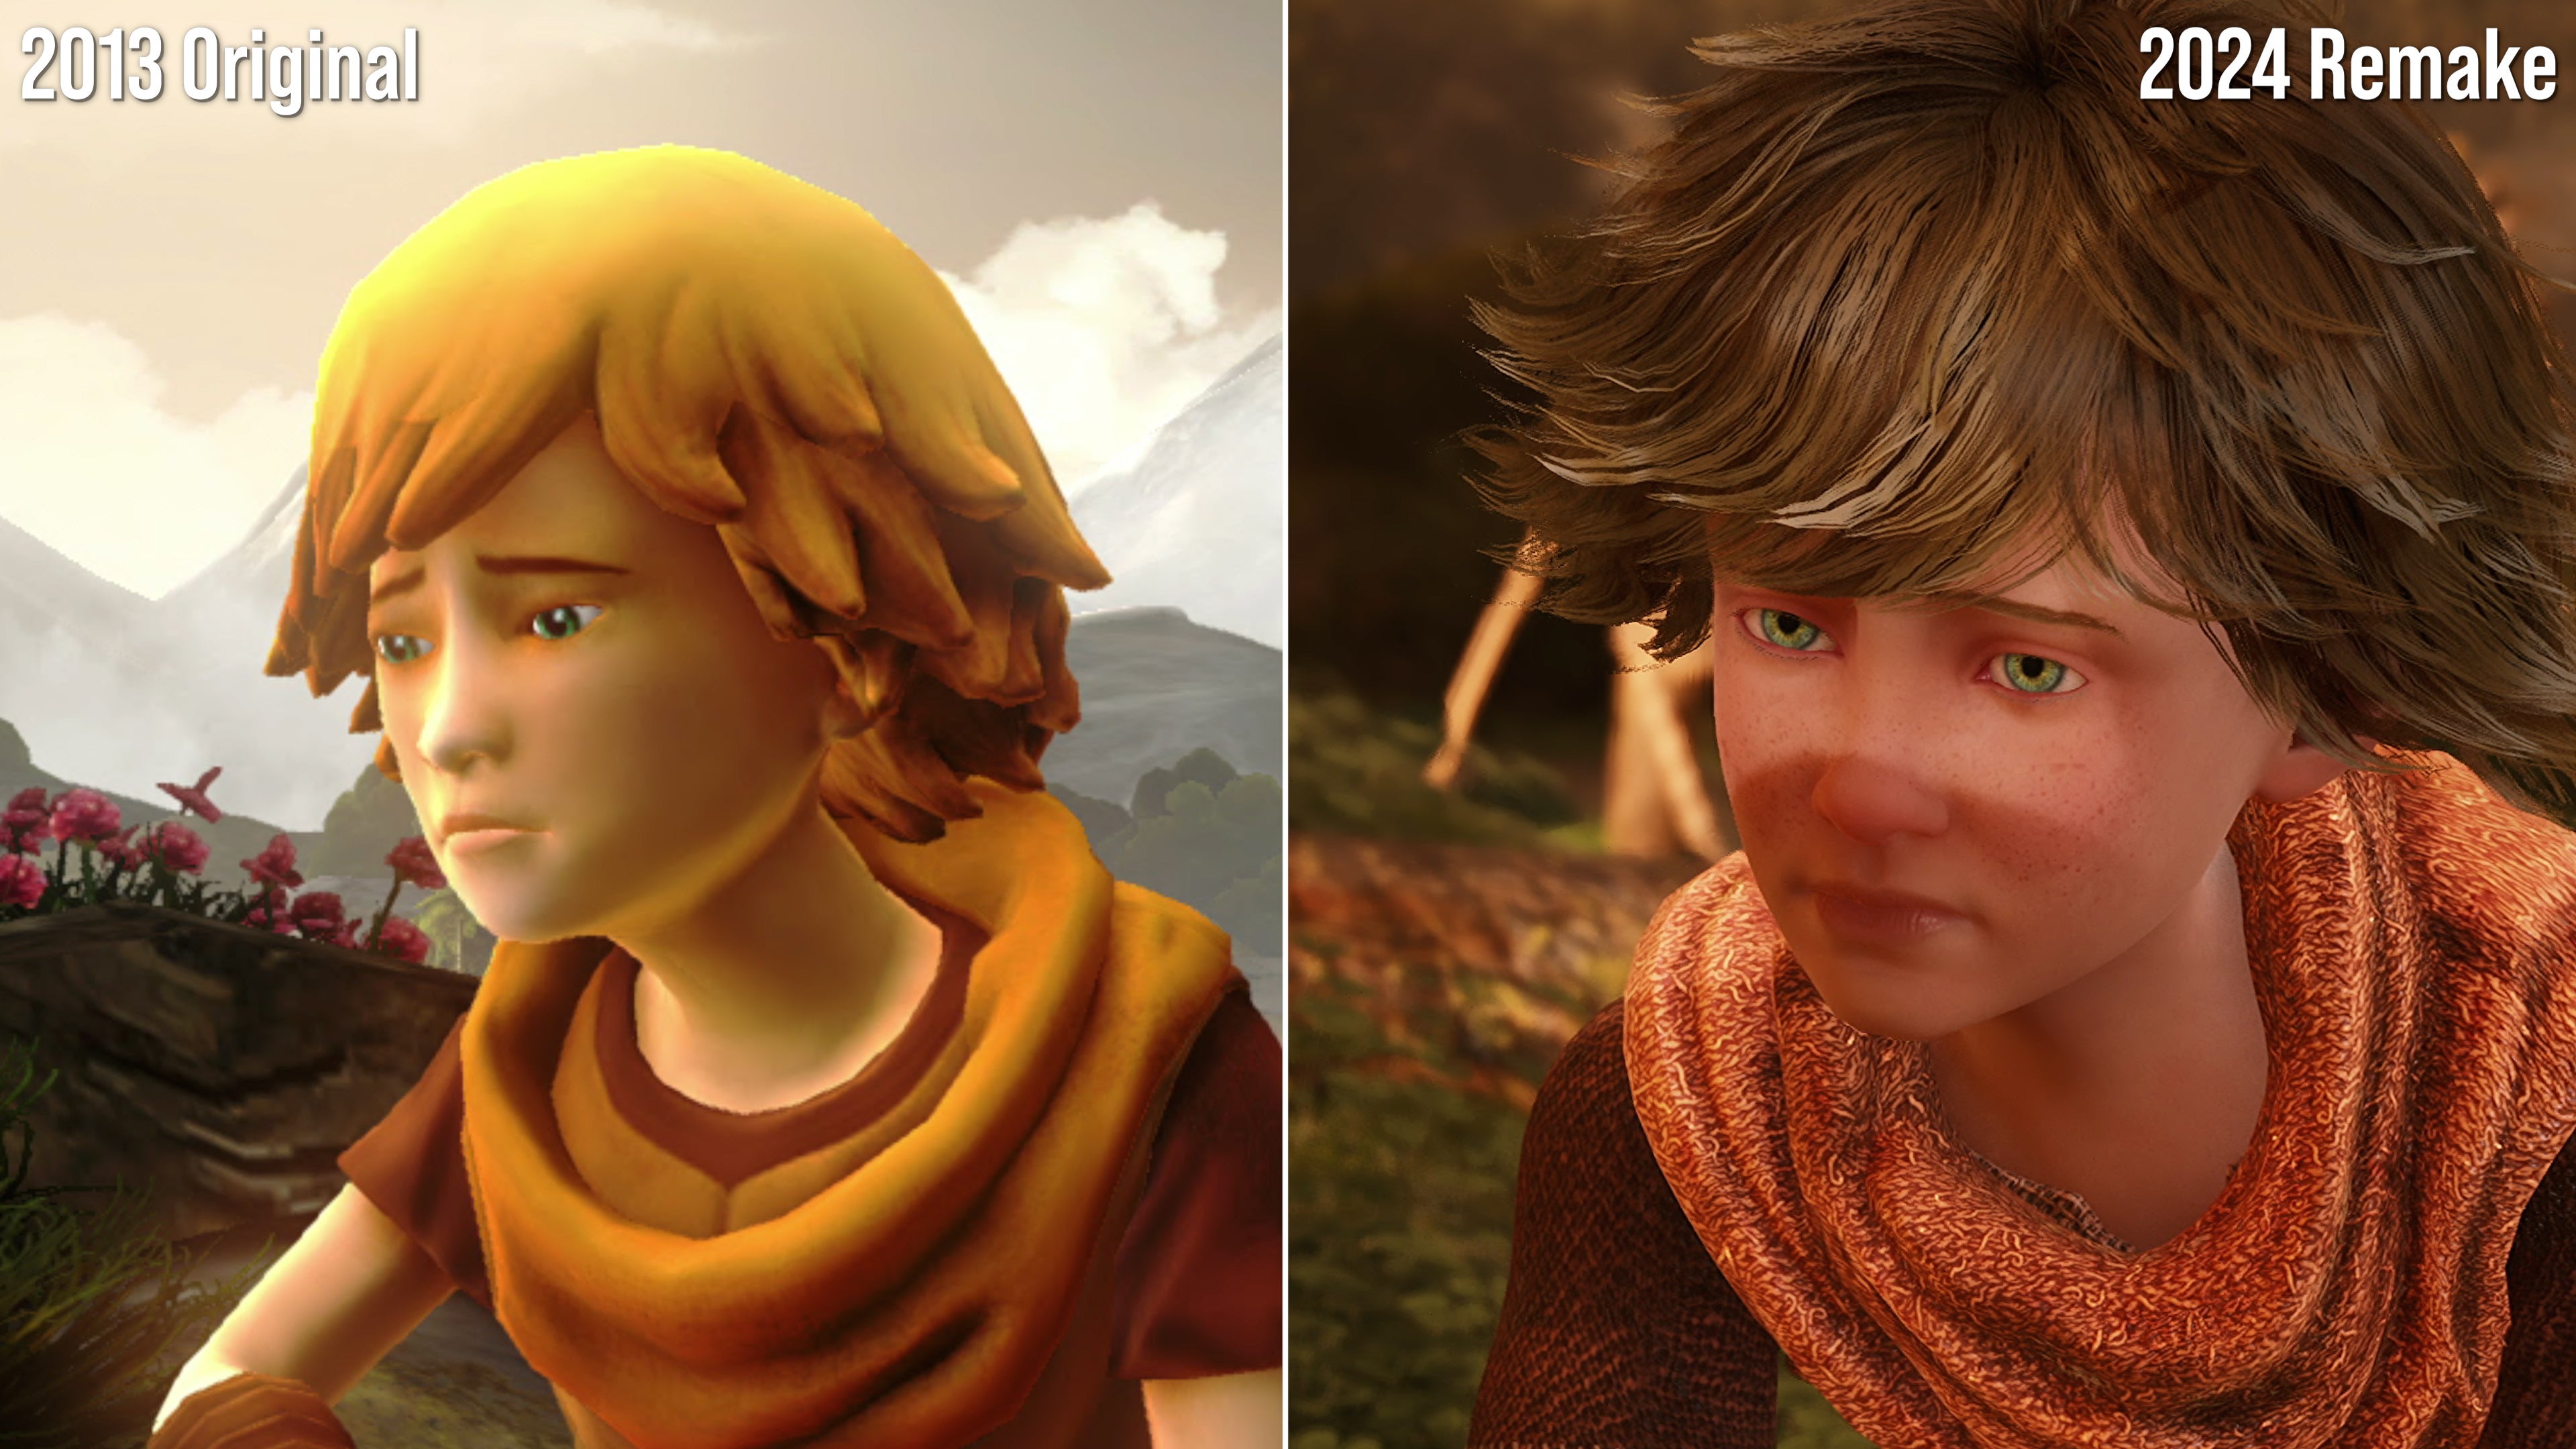 brothers a tale of two sons 屏幕截图对比：原版 vs 2024 重制版